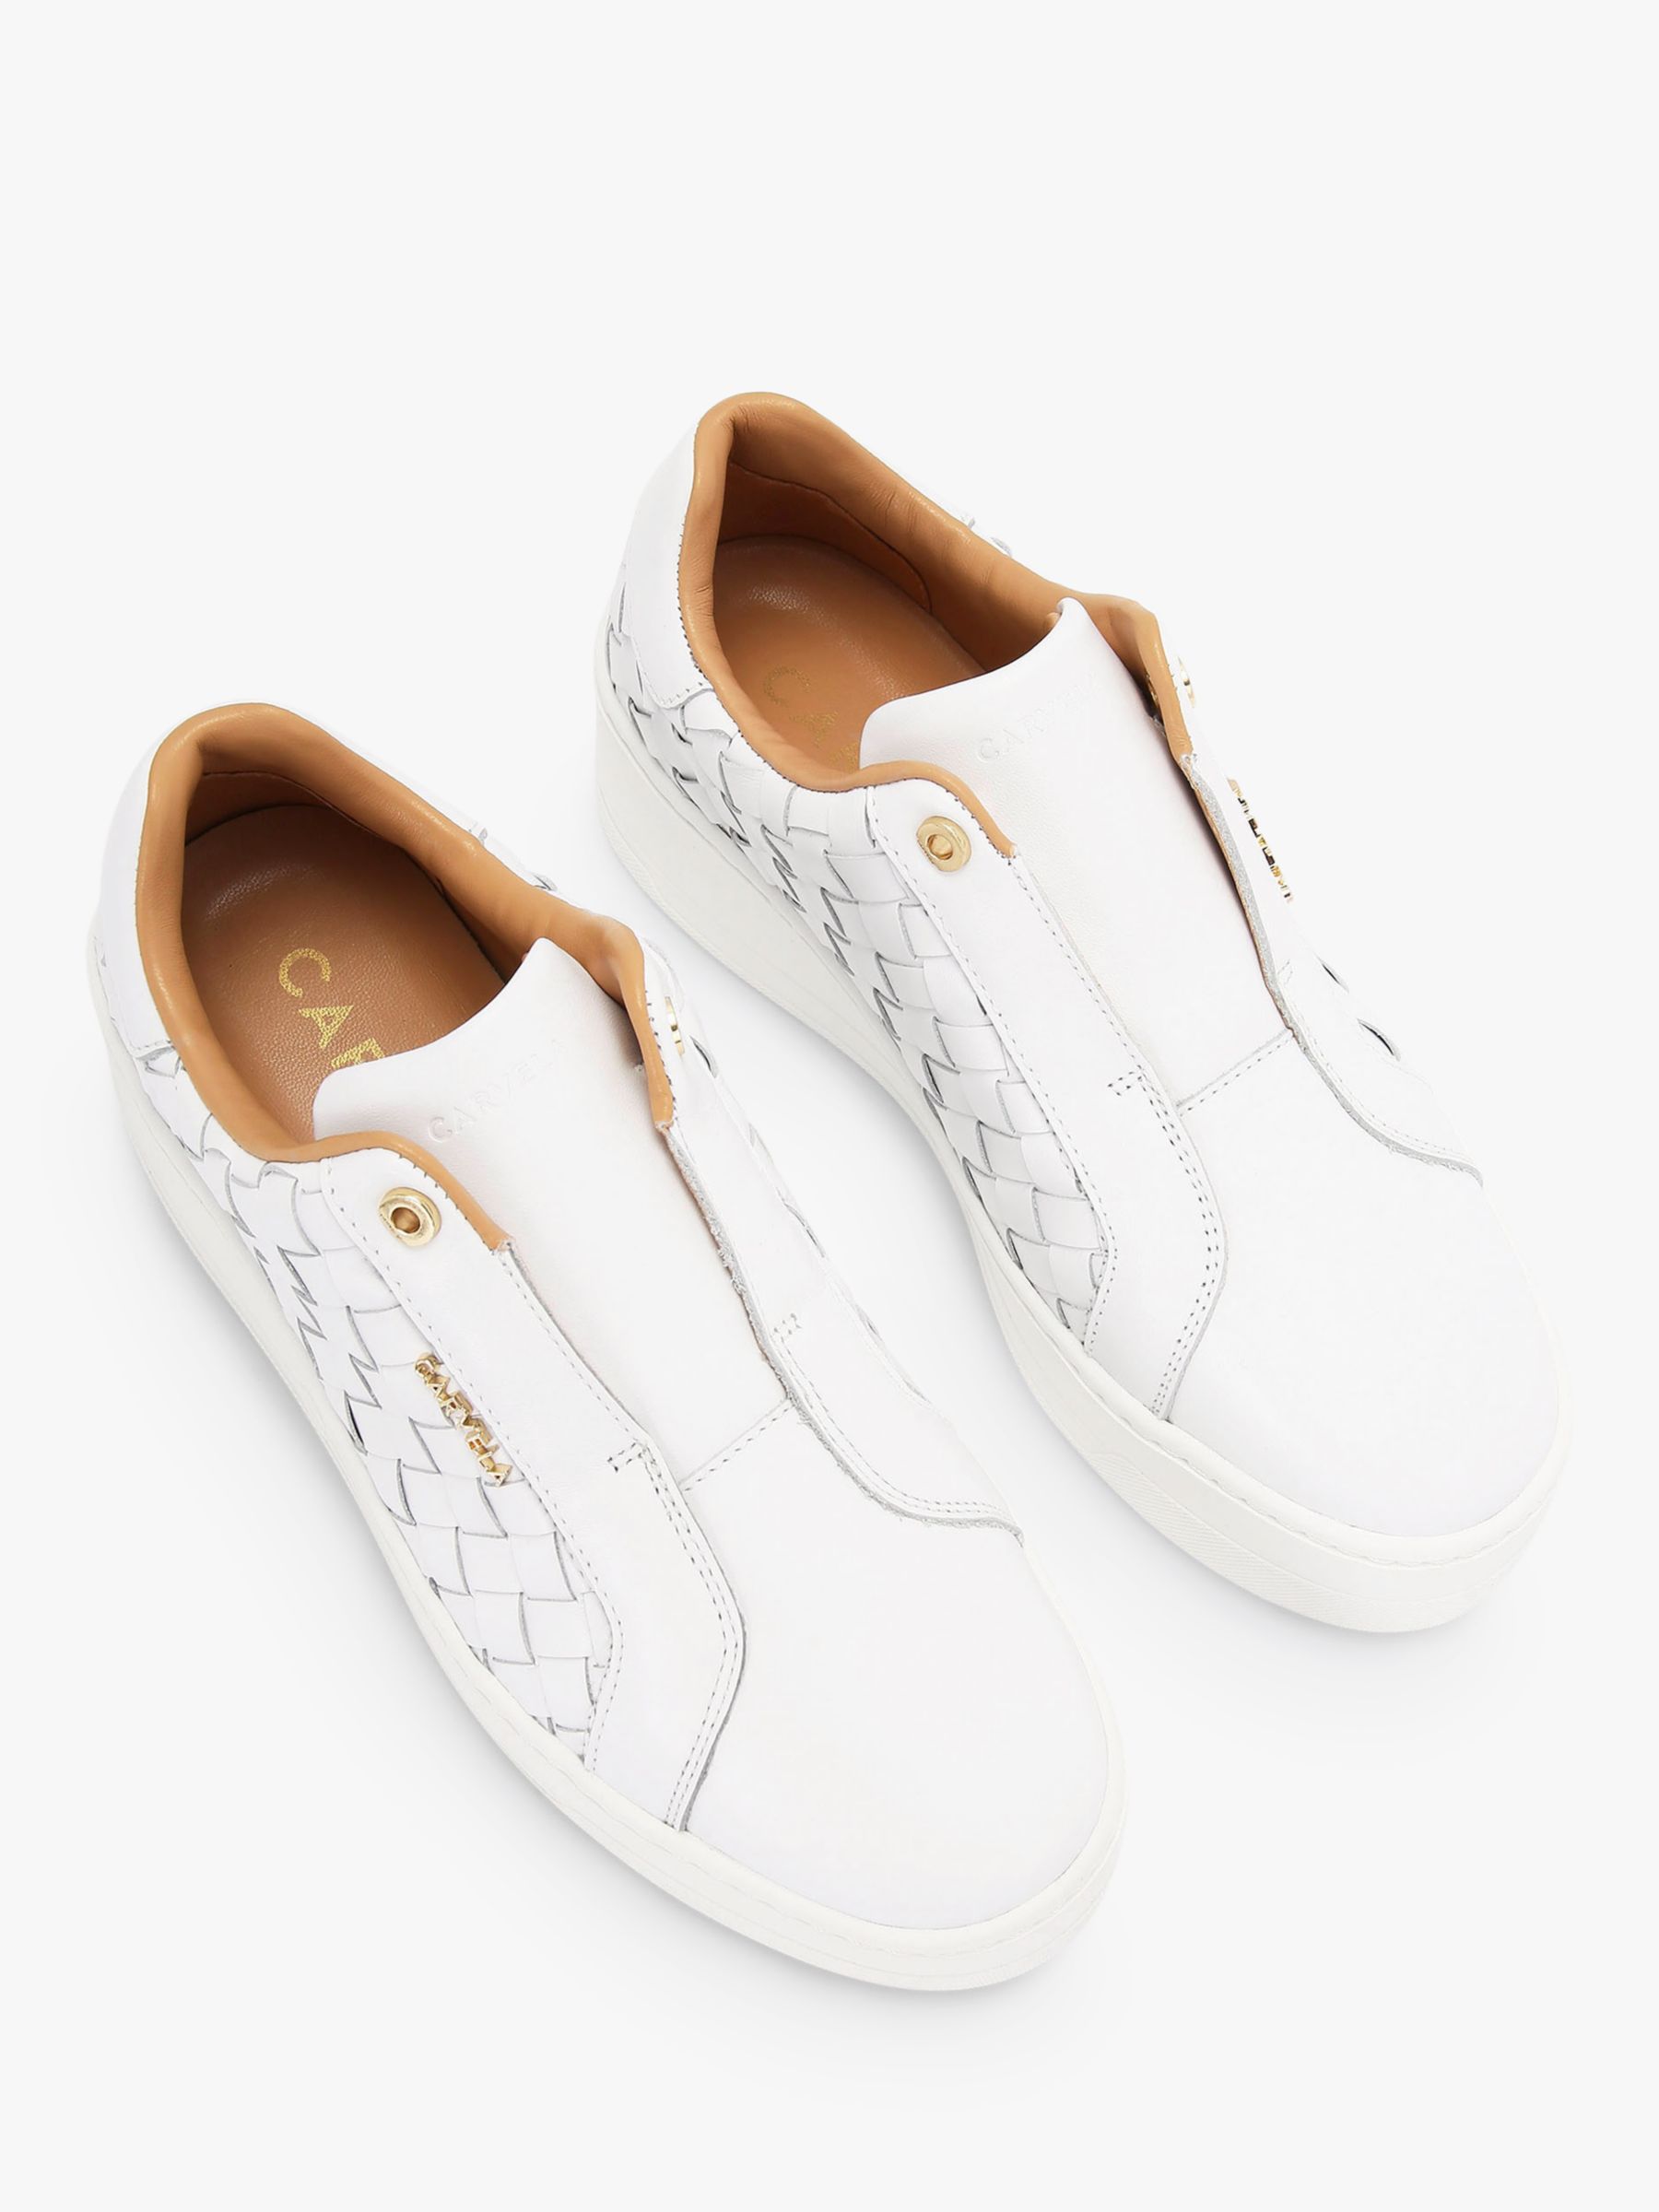 Buy Carvela Connected Leather Slip On Trainers, White Online at johnlewis.com